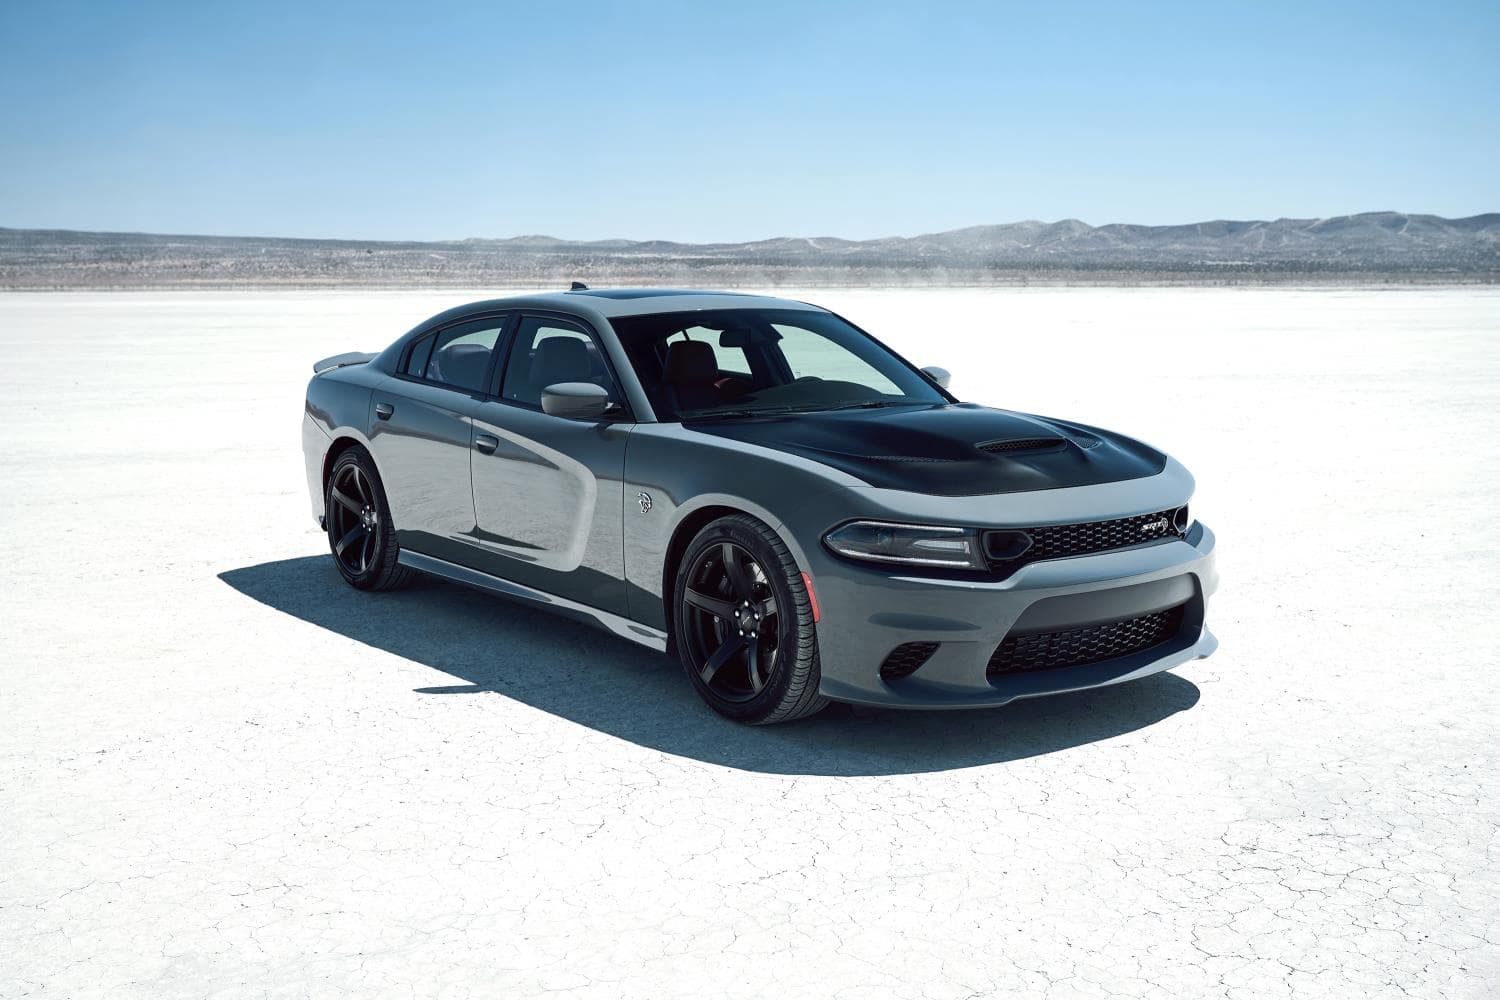 2019 Dodge Charger Gets Updated Looks and Performance